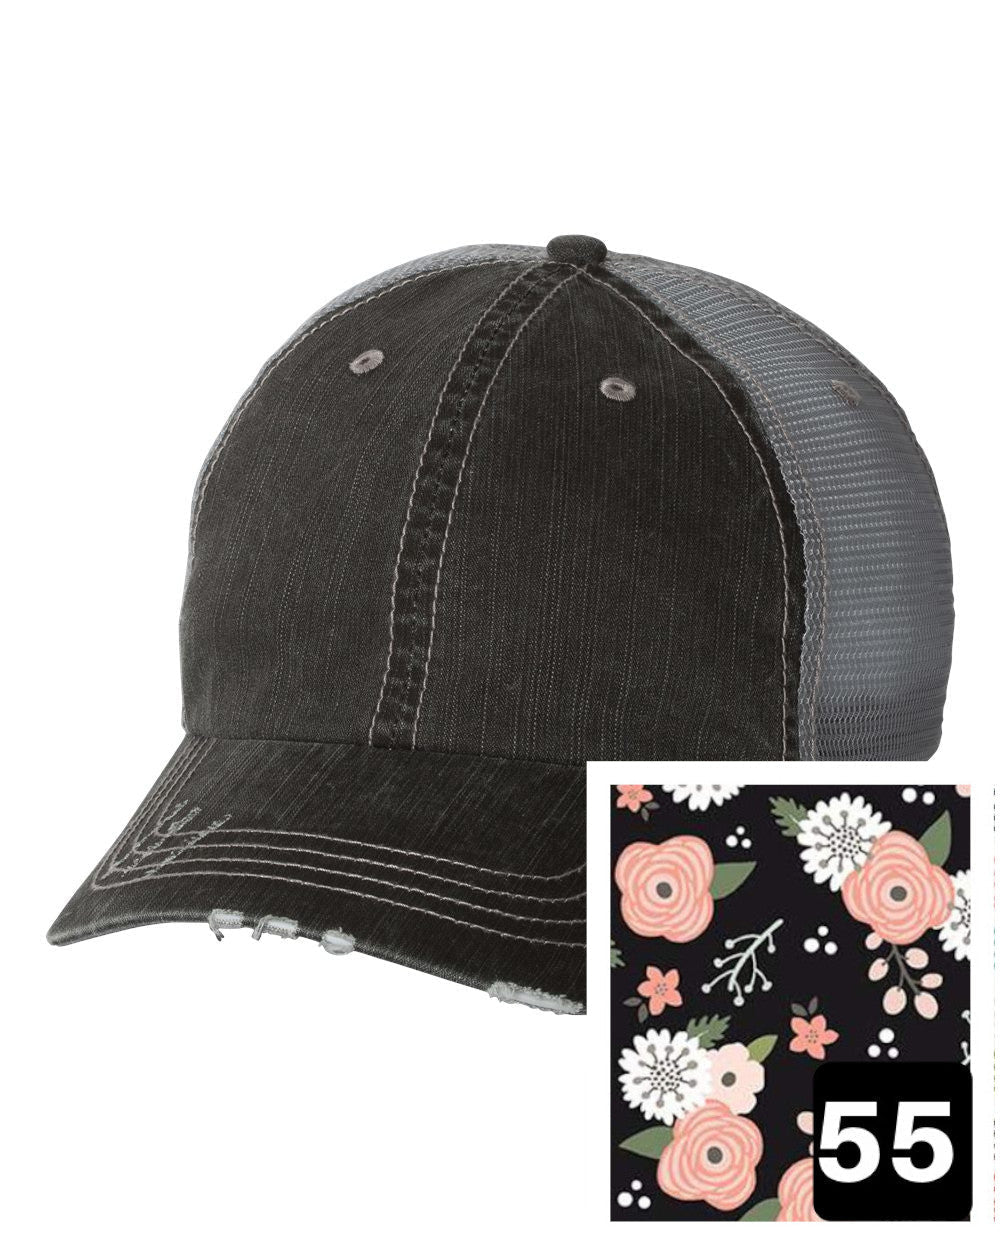 gray distressed trucker hat with petite floral on navy fabric state of New Mexico